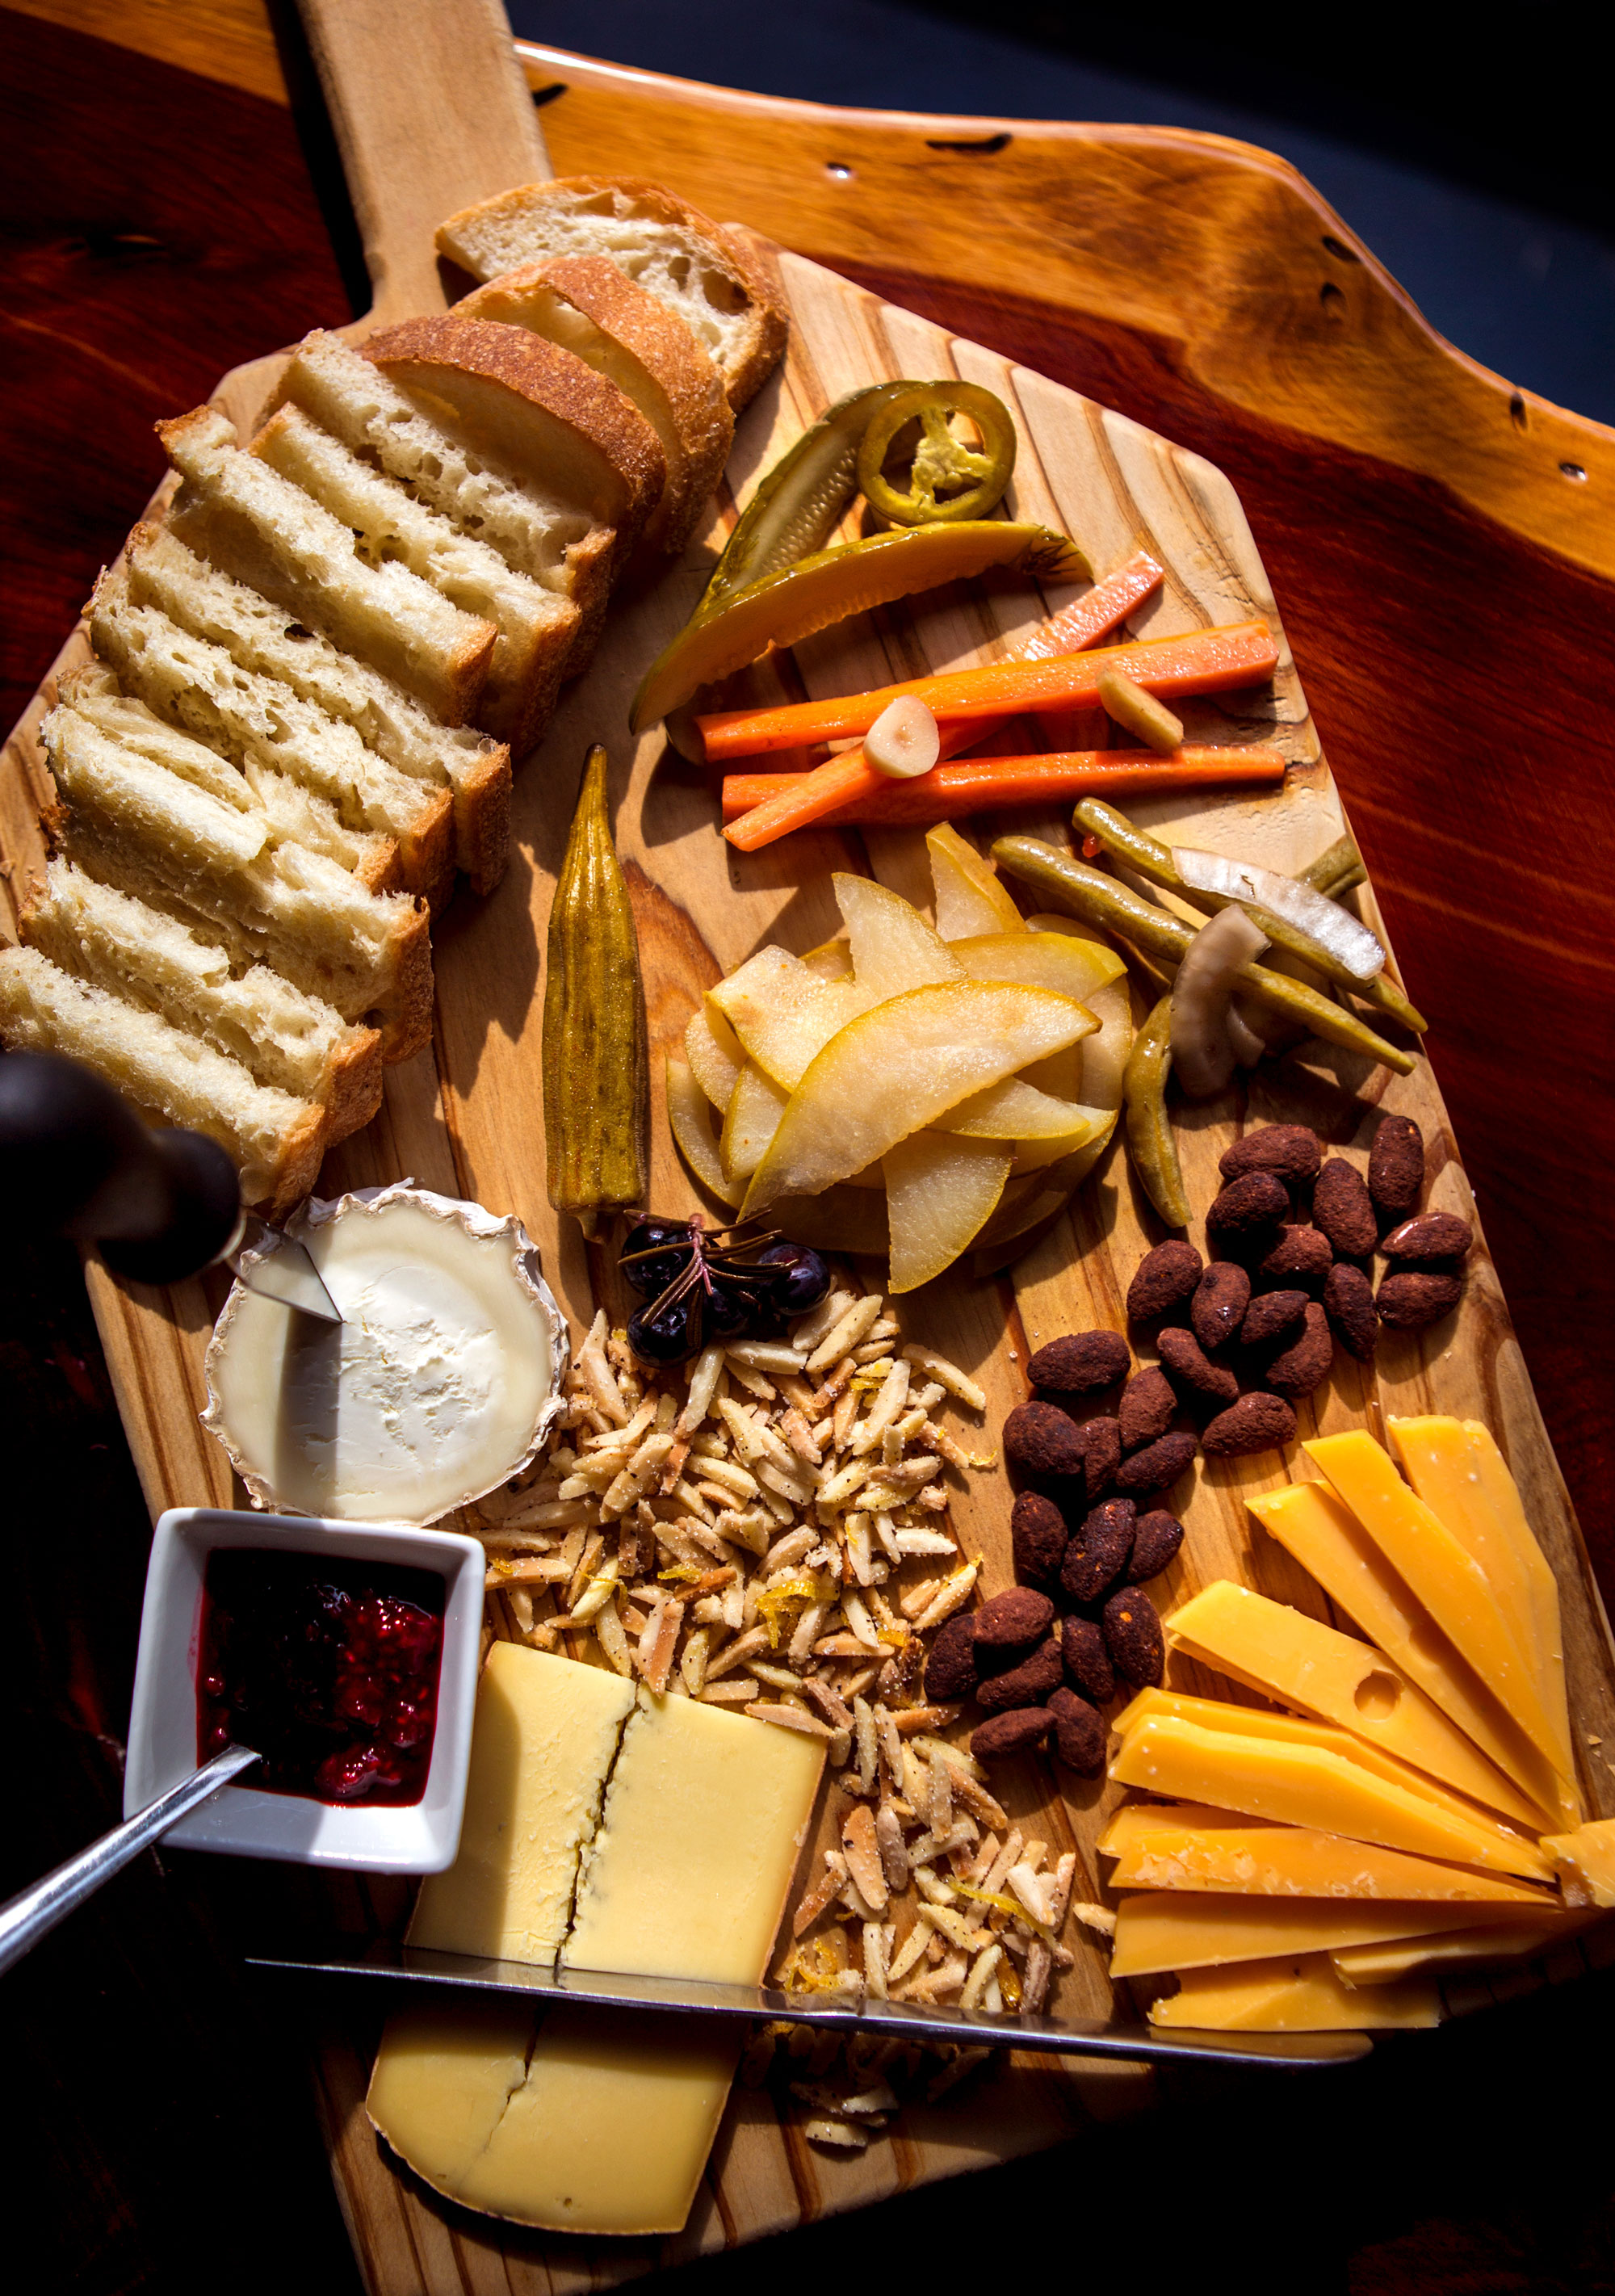 A cheese board from Ten:One.